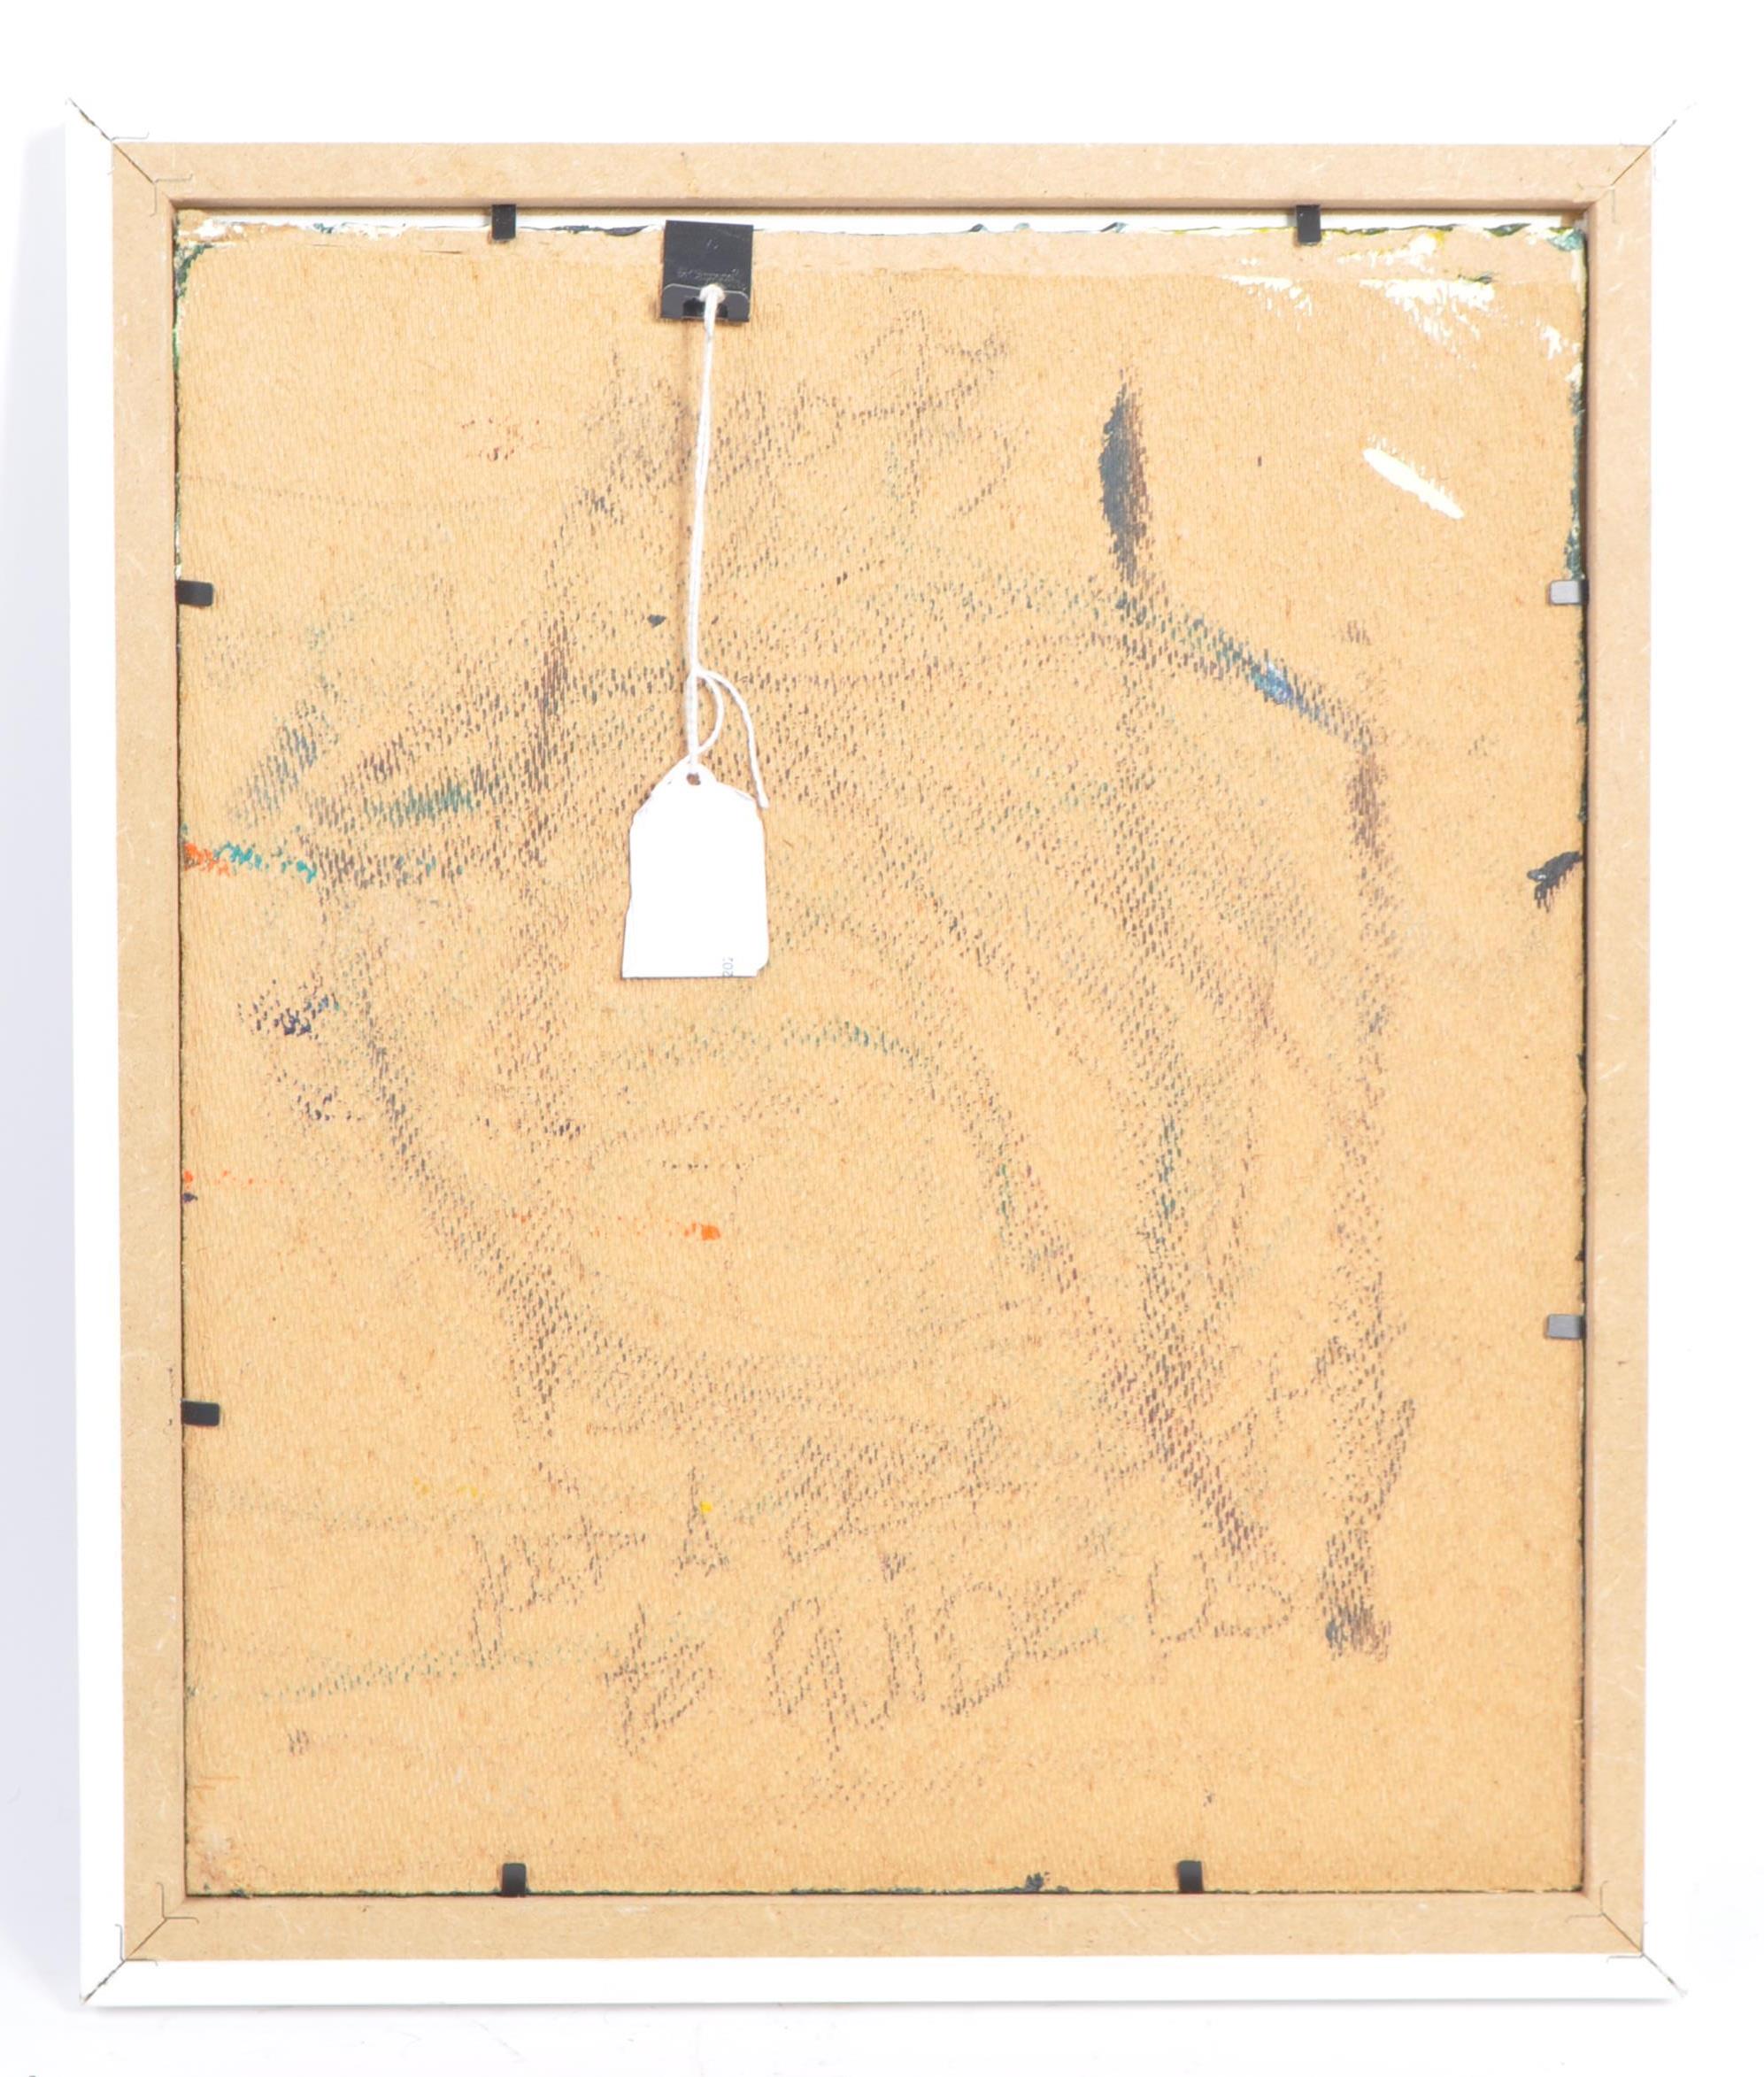 1973 ABSTRACT ART 'JUST A BEER LIGHT TO GUIDE US' TENGO - Image 5 of 5